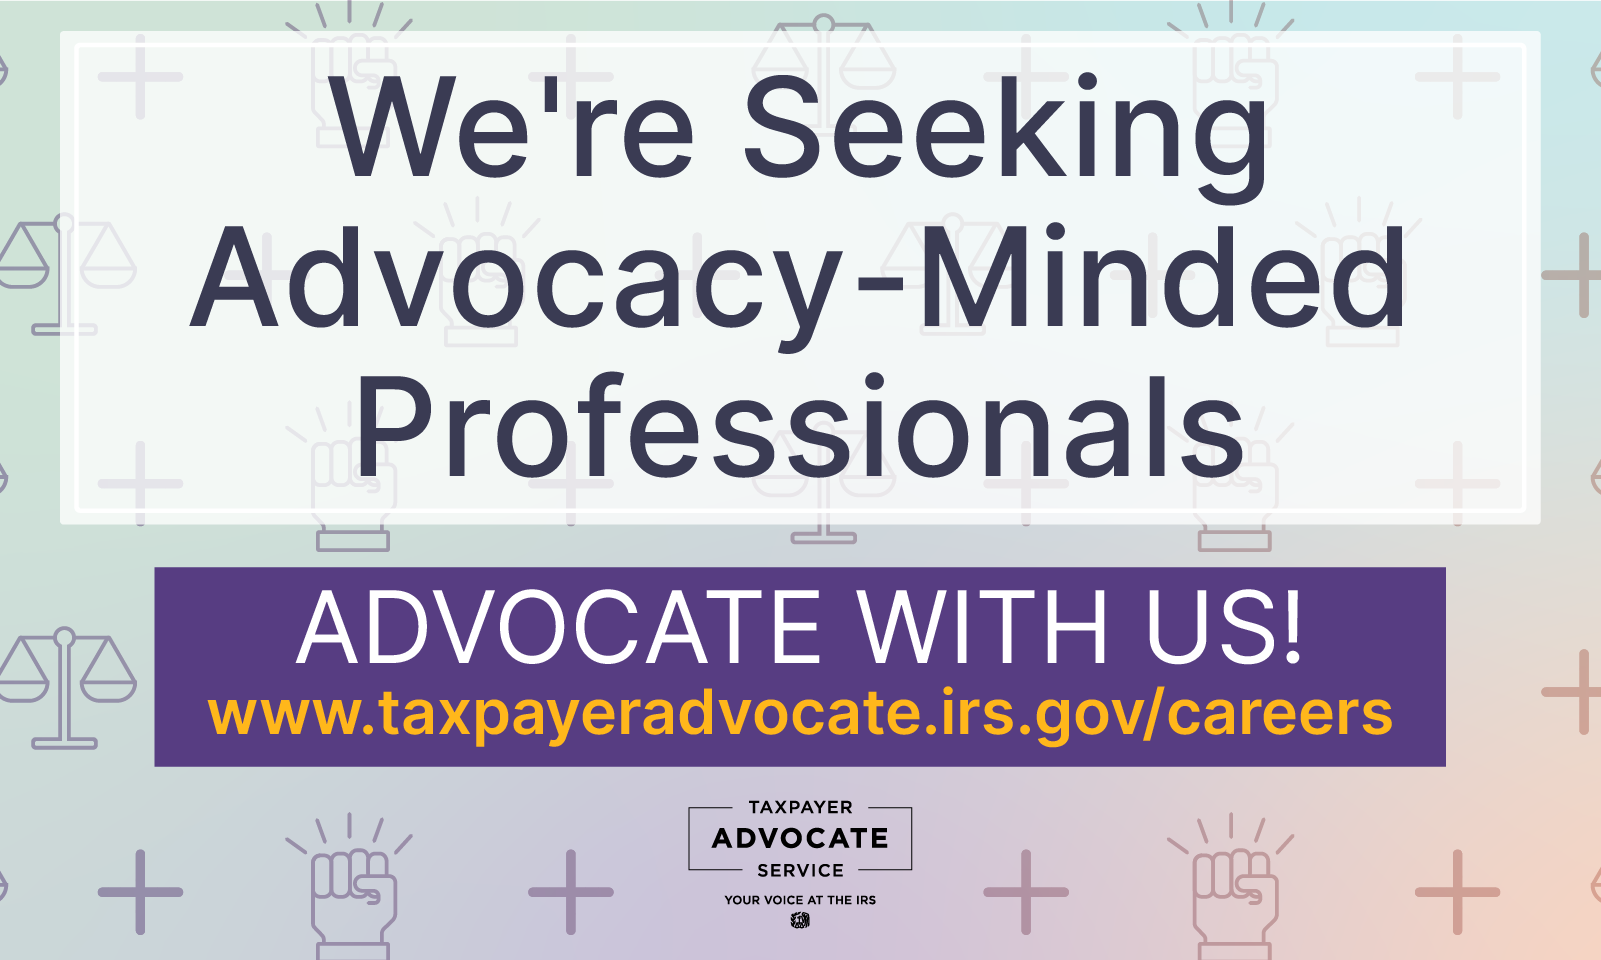 We're seeking advocacy-minded professionals. Advocate with us! www.taxpayeradvocate.irs.gov/careers. Taxpayer Advocate logo